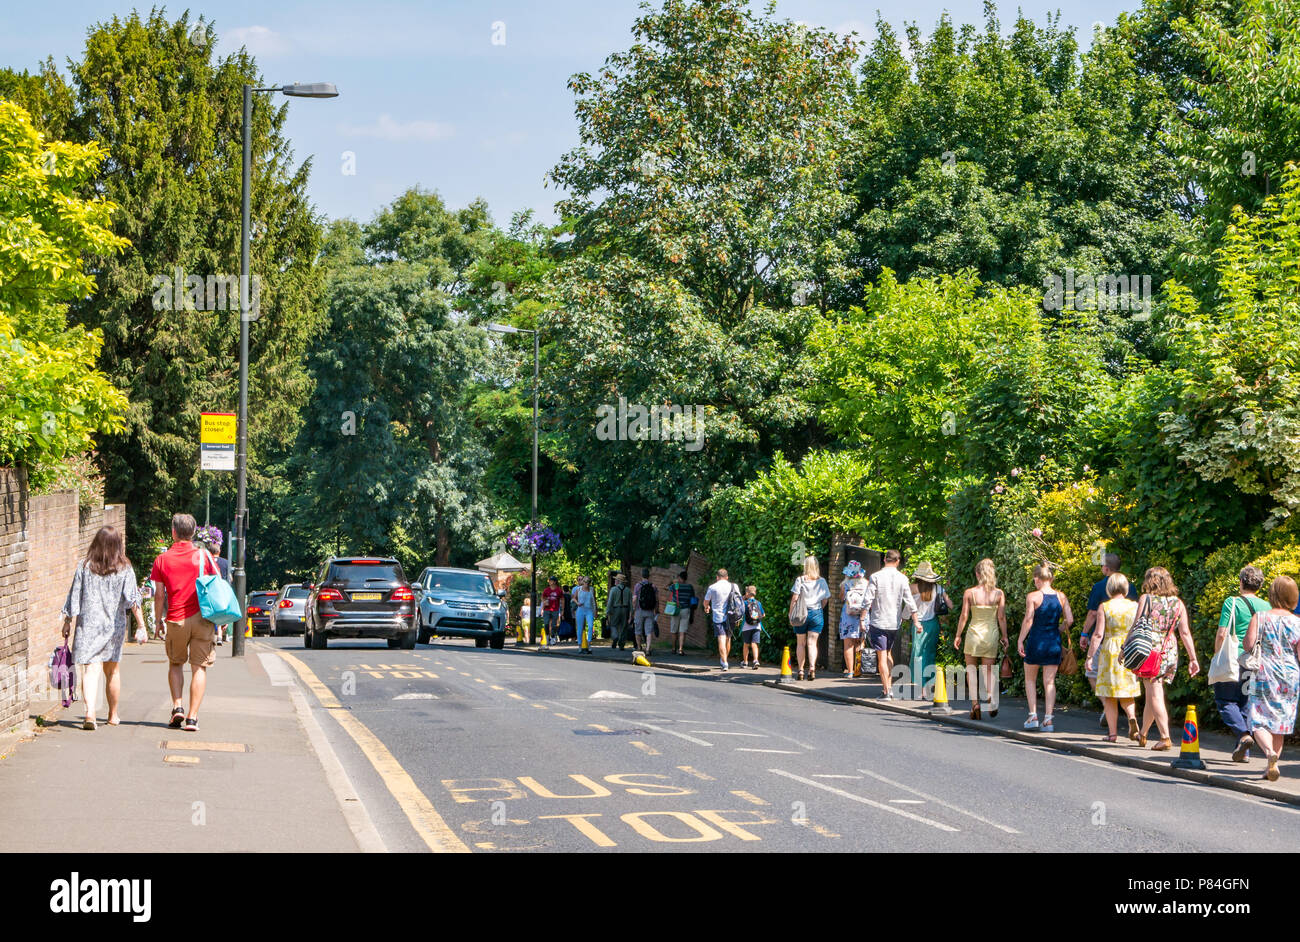 Long queue of people walking on pavement to All England Lawn Tennis Championship in Summer, Wimbledon, London, England, UK Stock Photo